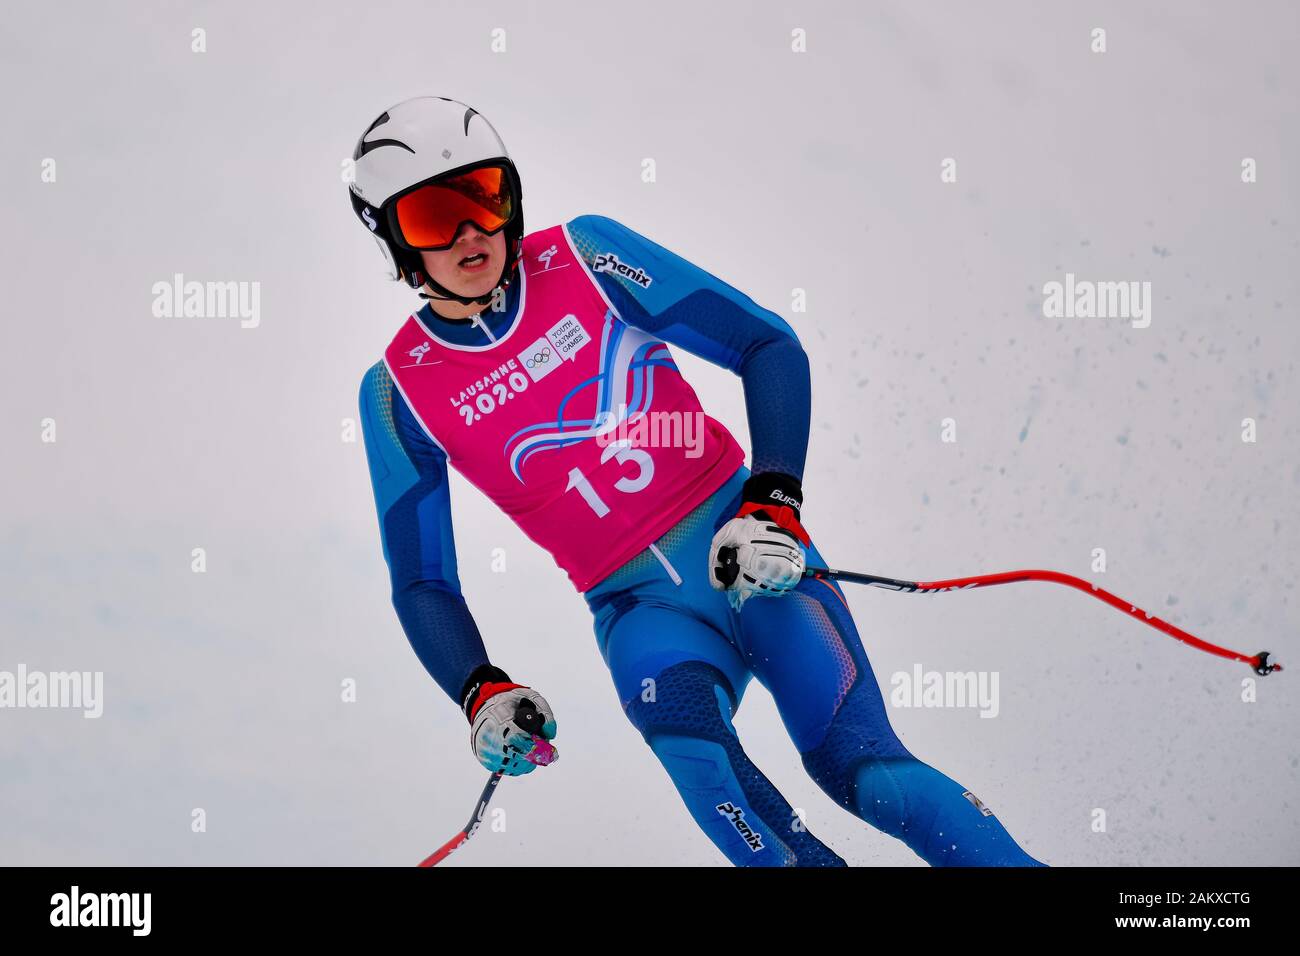 LAUSANNE, SWITZERLAND. 10th, Jan 2020. SELLAEG Simen (NOR) competes in Alpine Ski Mens Super G during the Lausanne 2020 Youth Olympic Games at Les Diablerets Alpine Centre on Friday, 10 January 2020. LAUSANNE, SWITZERLAND. Credit: Taka G Wu/Alamy Live News Stock Photo